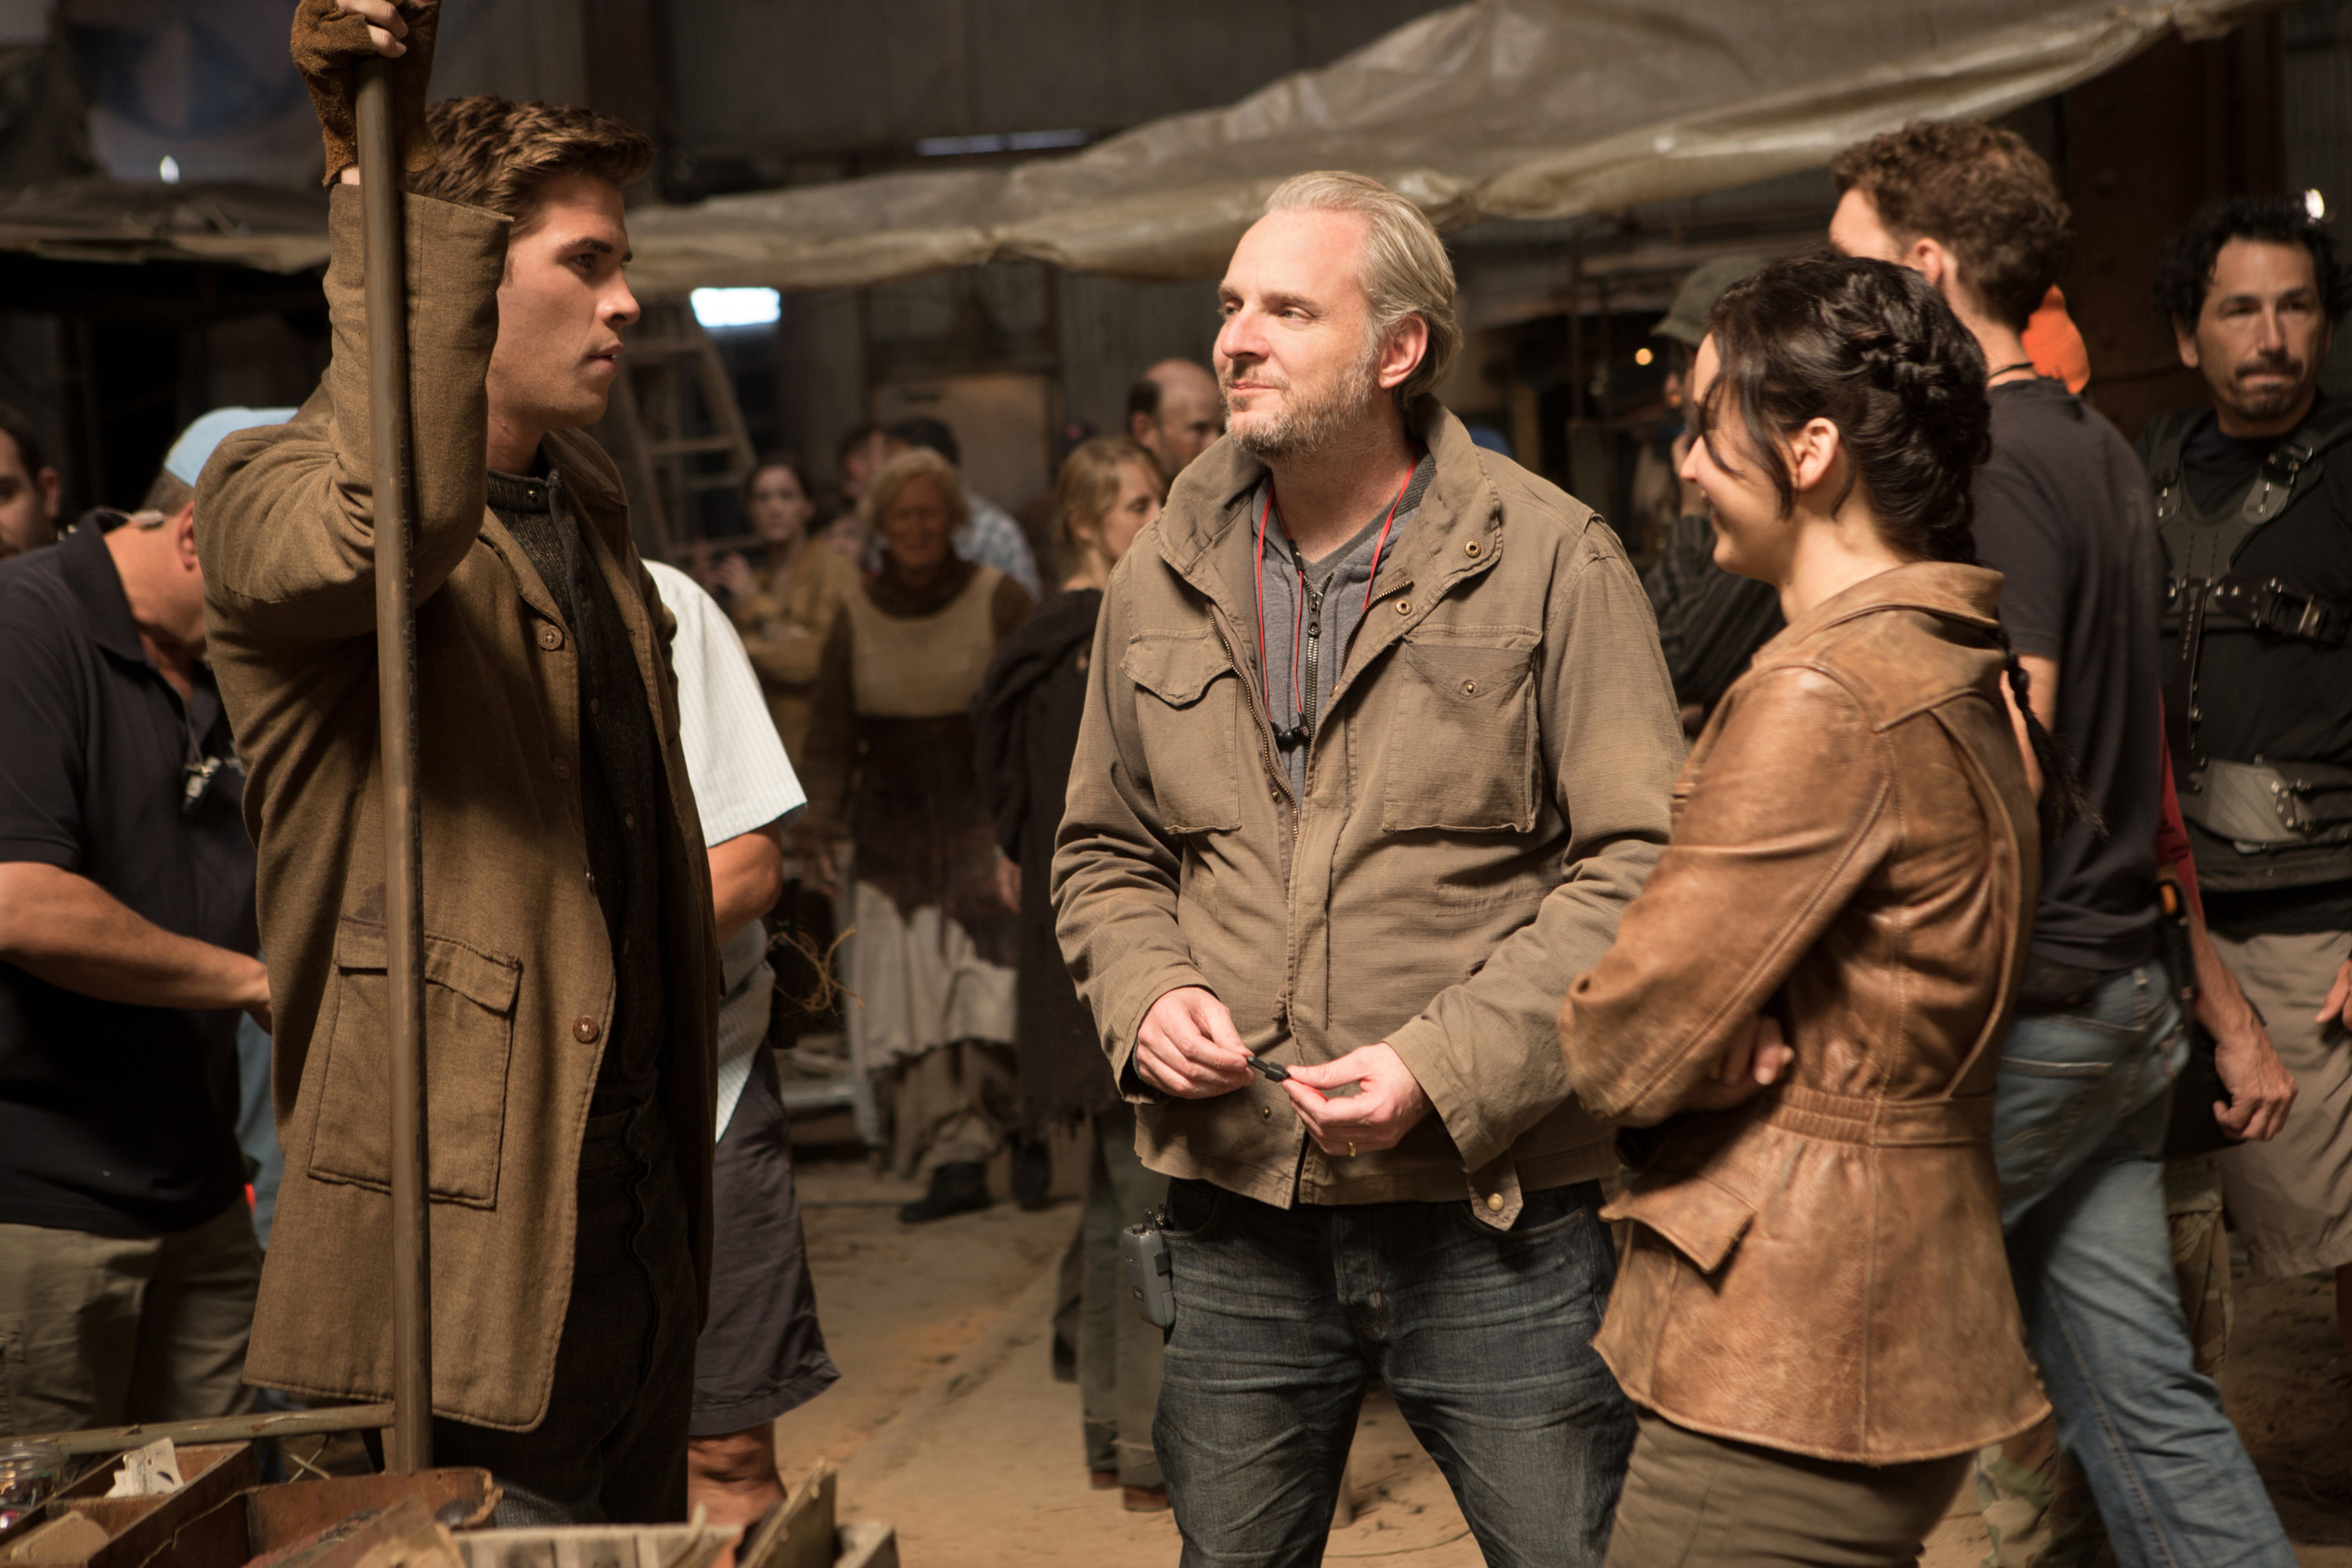 Behind the scenes of one of the &quot;Hunger Games&quot; films